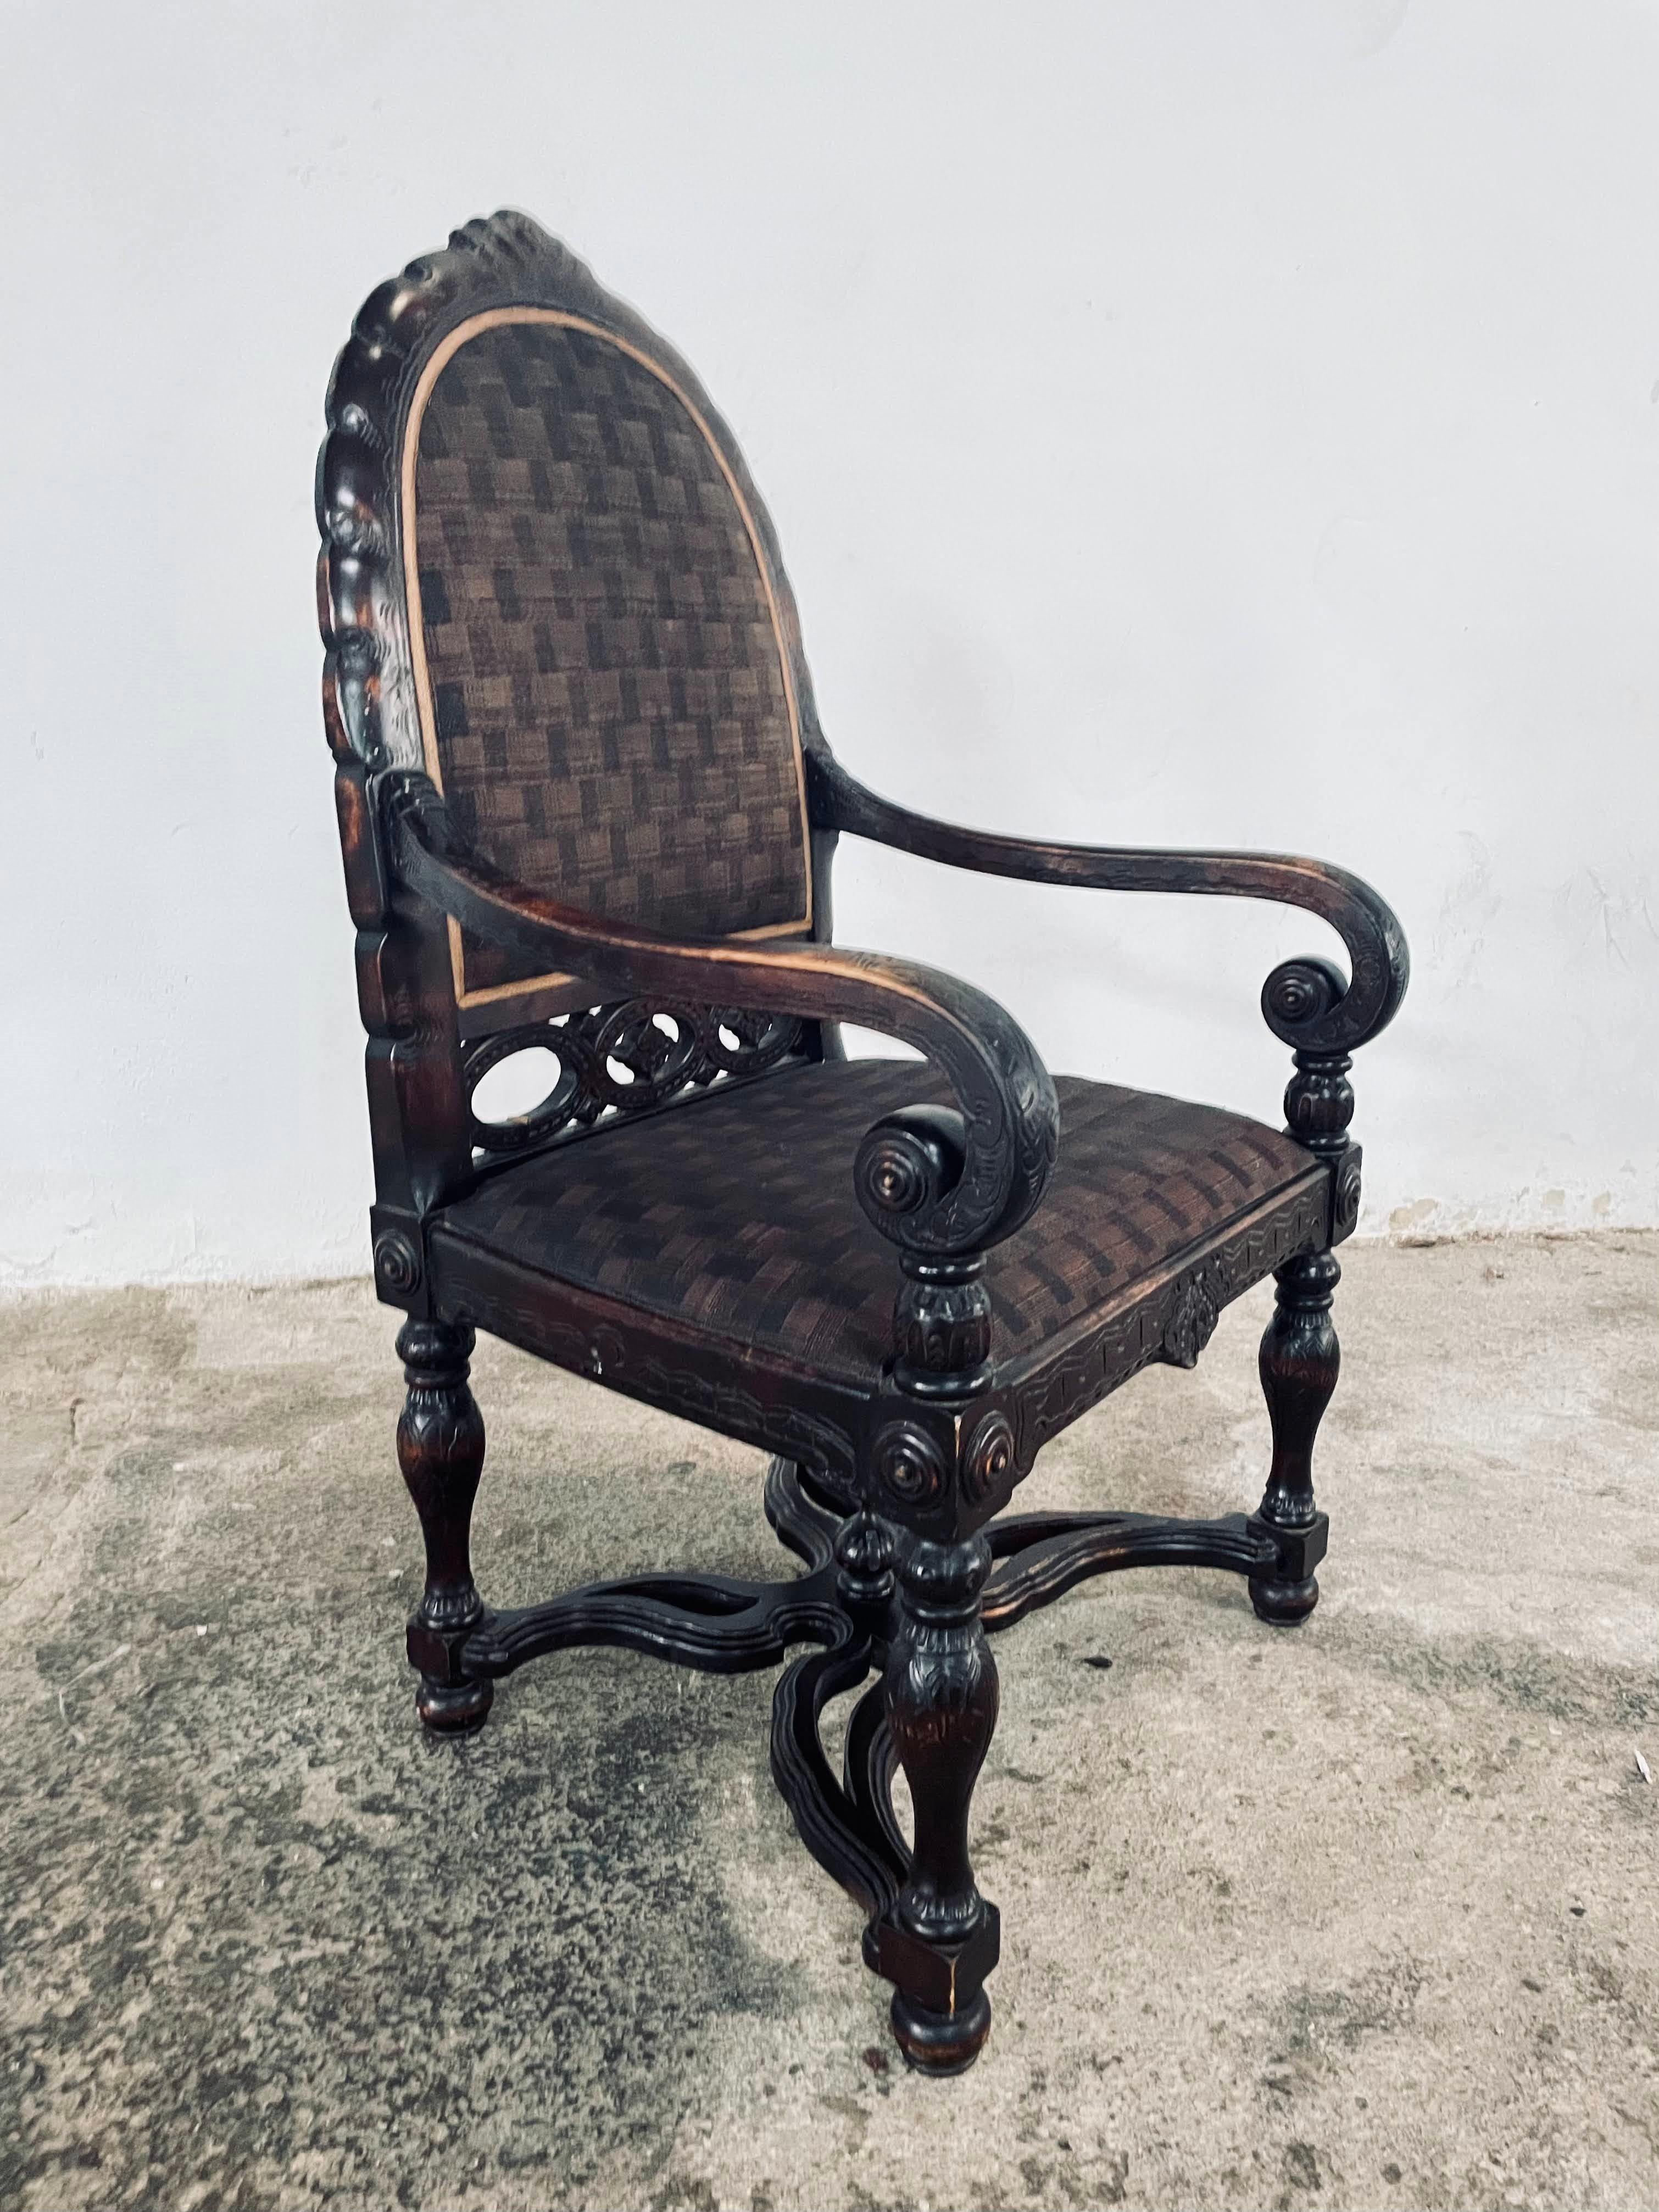 Set of 2 Dutch Victorian Walnut Parlour Chairs with intricate carving details throughout, circa late 1800s, His and Hers chair set
Beautiful natural and original walnut frames with original fabric seats and backrests, the gentlemen's version has a